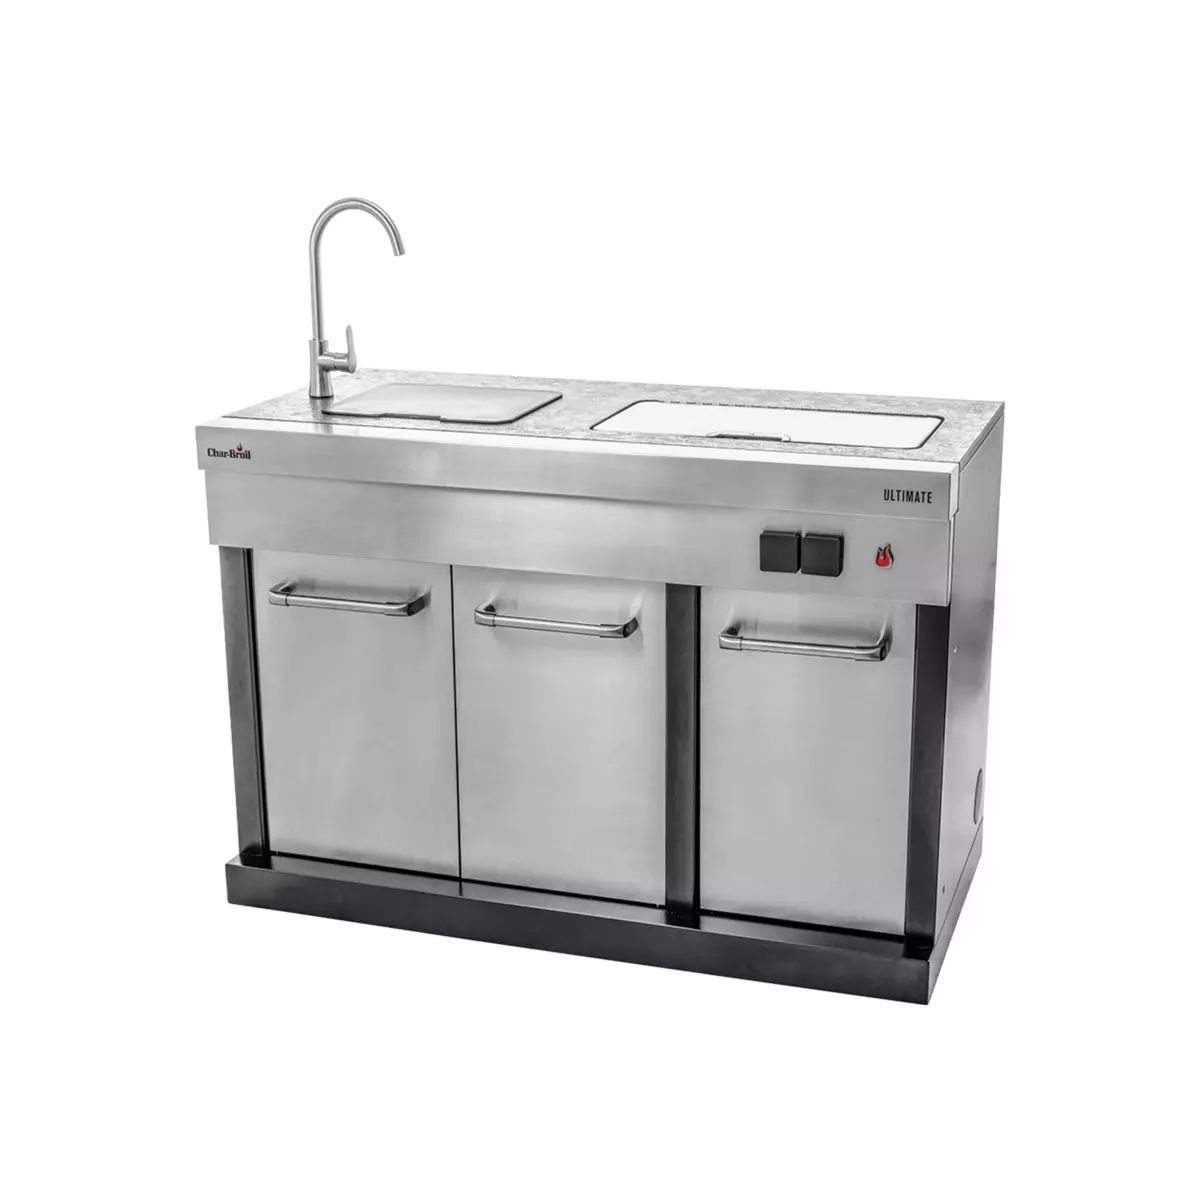 CHAR-BROIL Cuisine Ultimate outdoor Char-Broil - Module entertainement